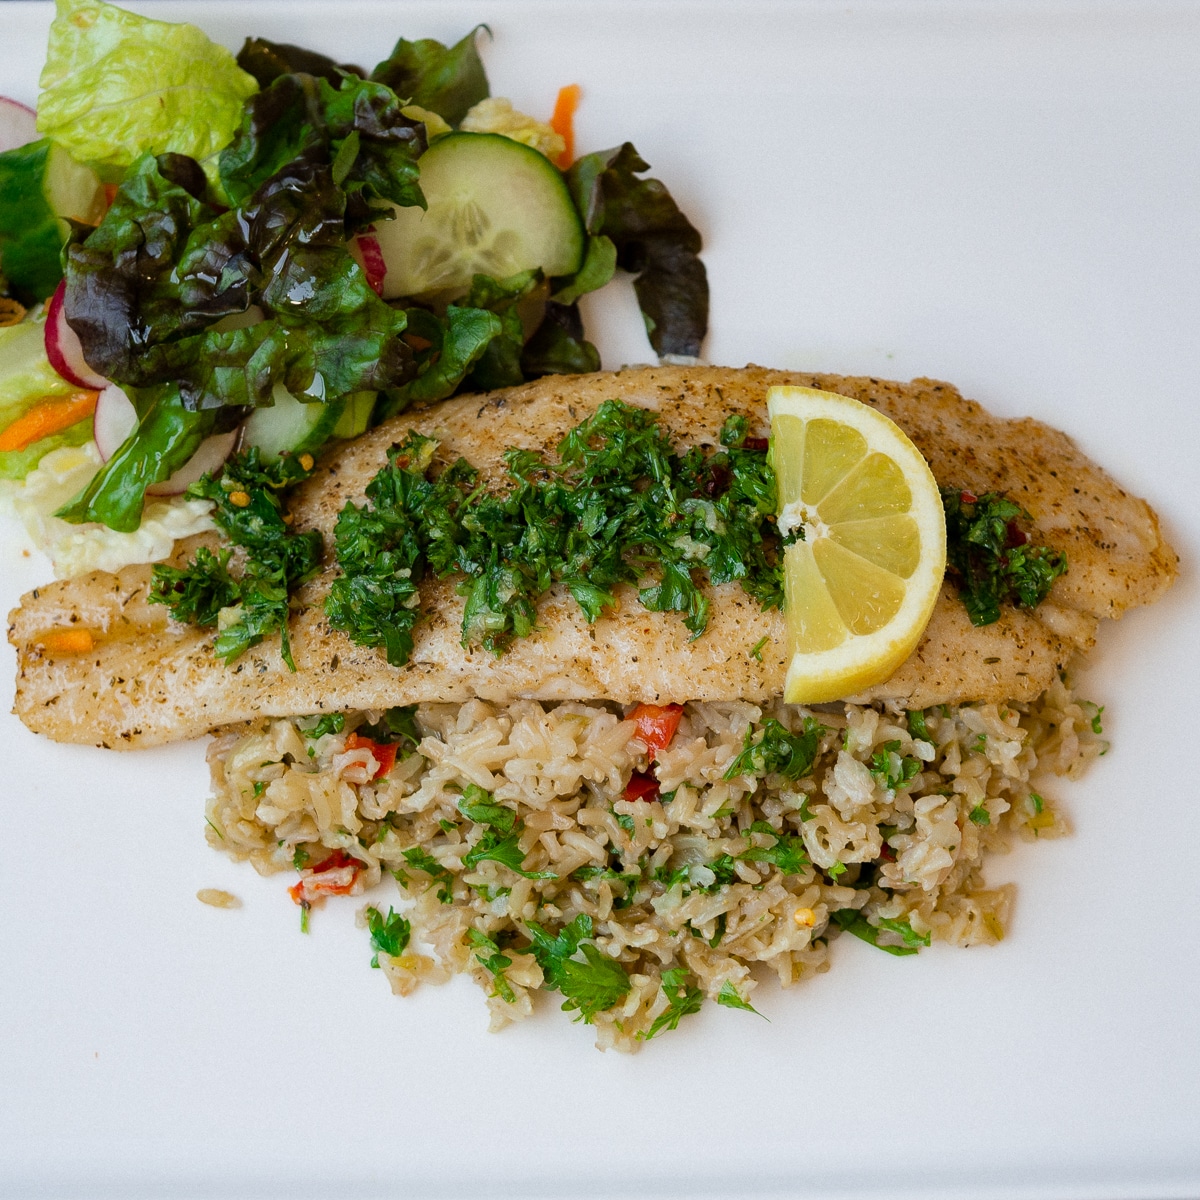 Brown basmati rice pilaf top with fish fillet gremolata and chopped salad on the side on a white plate.